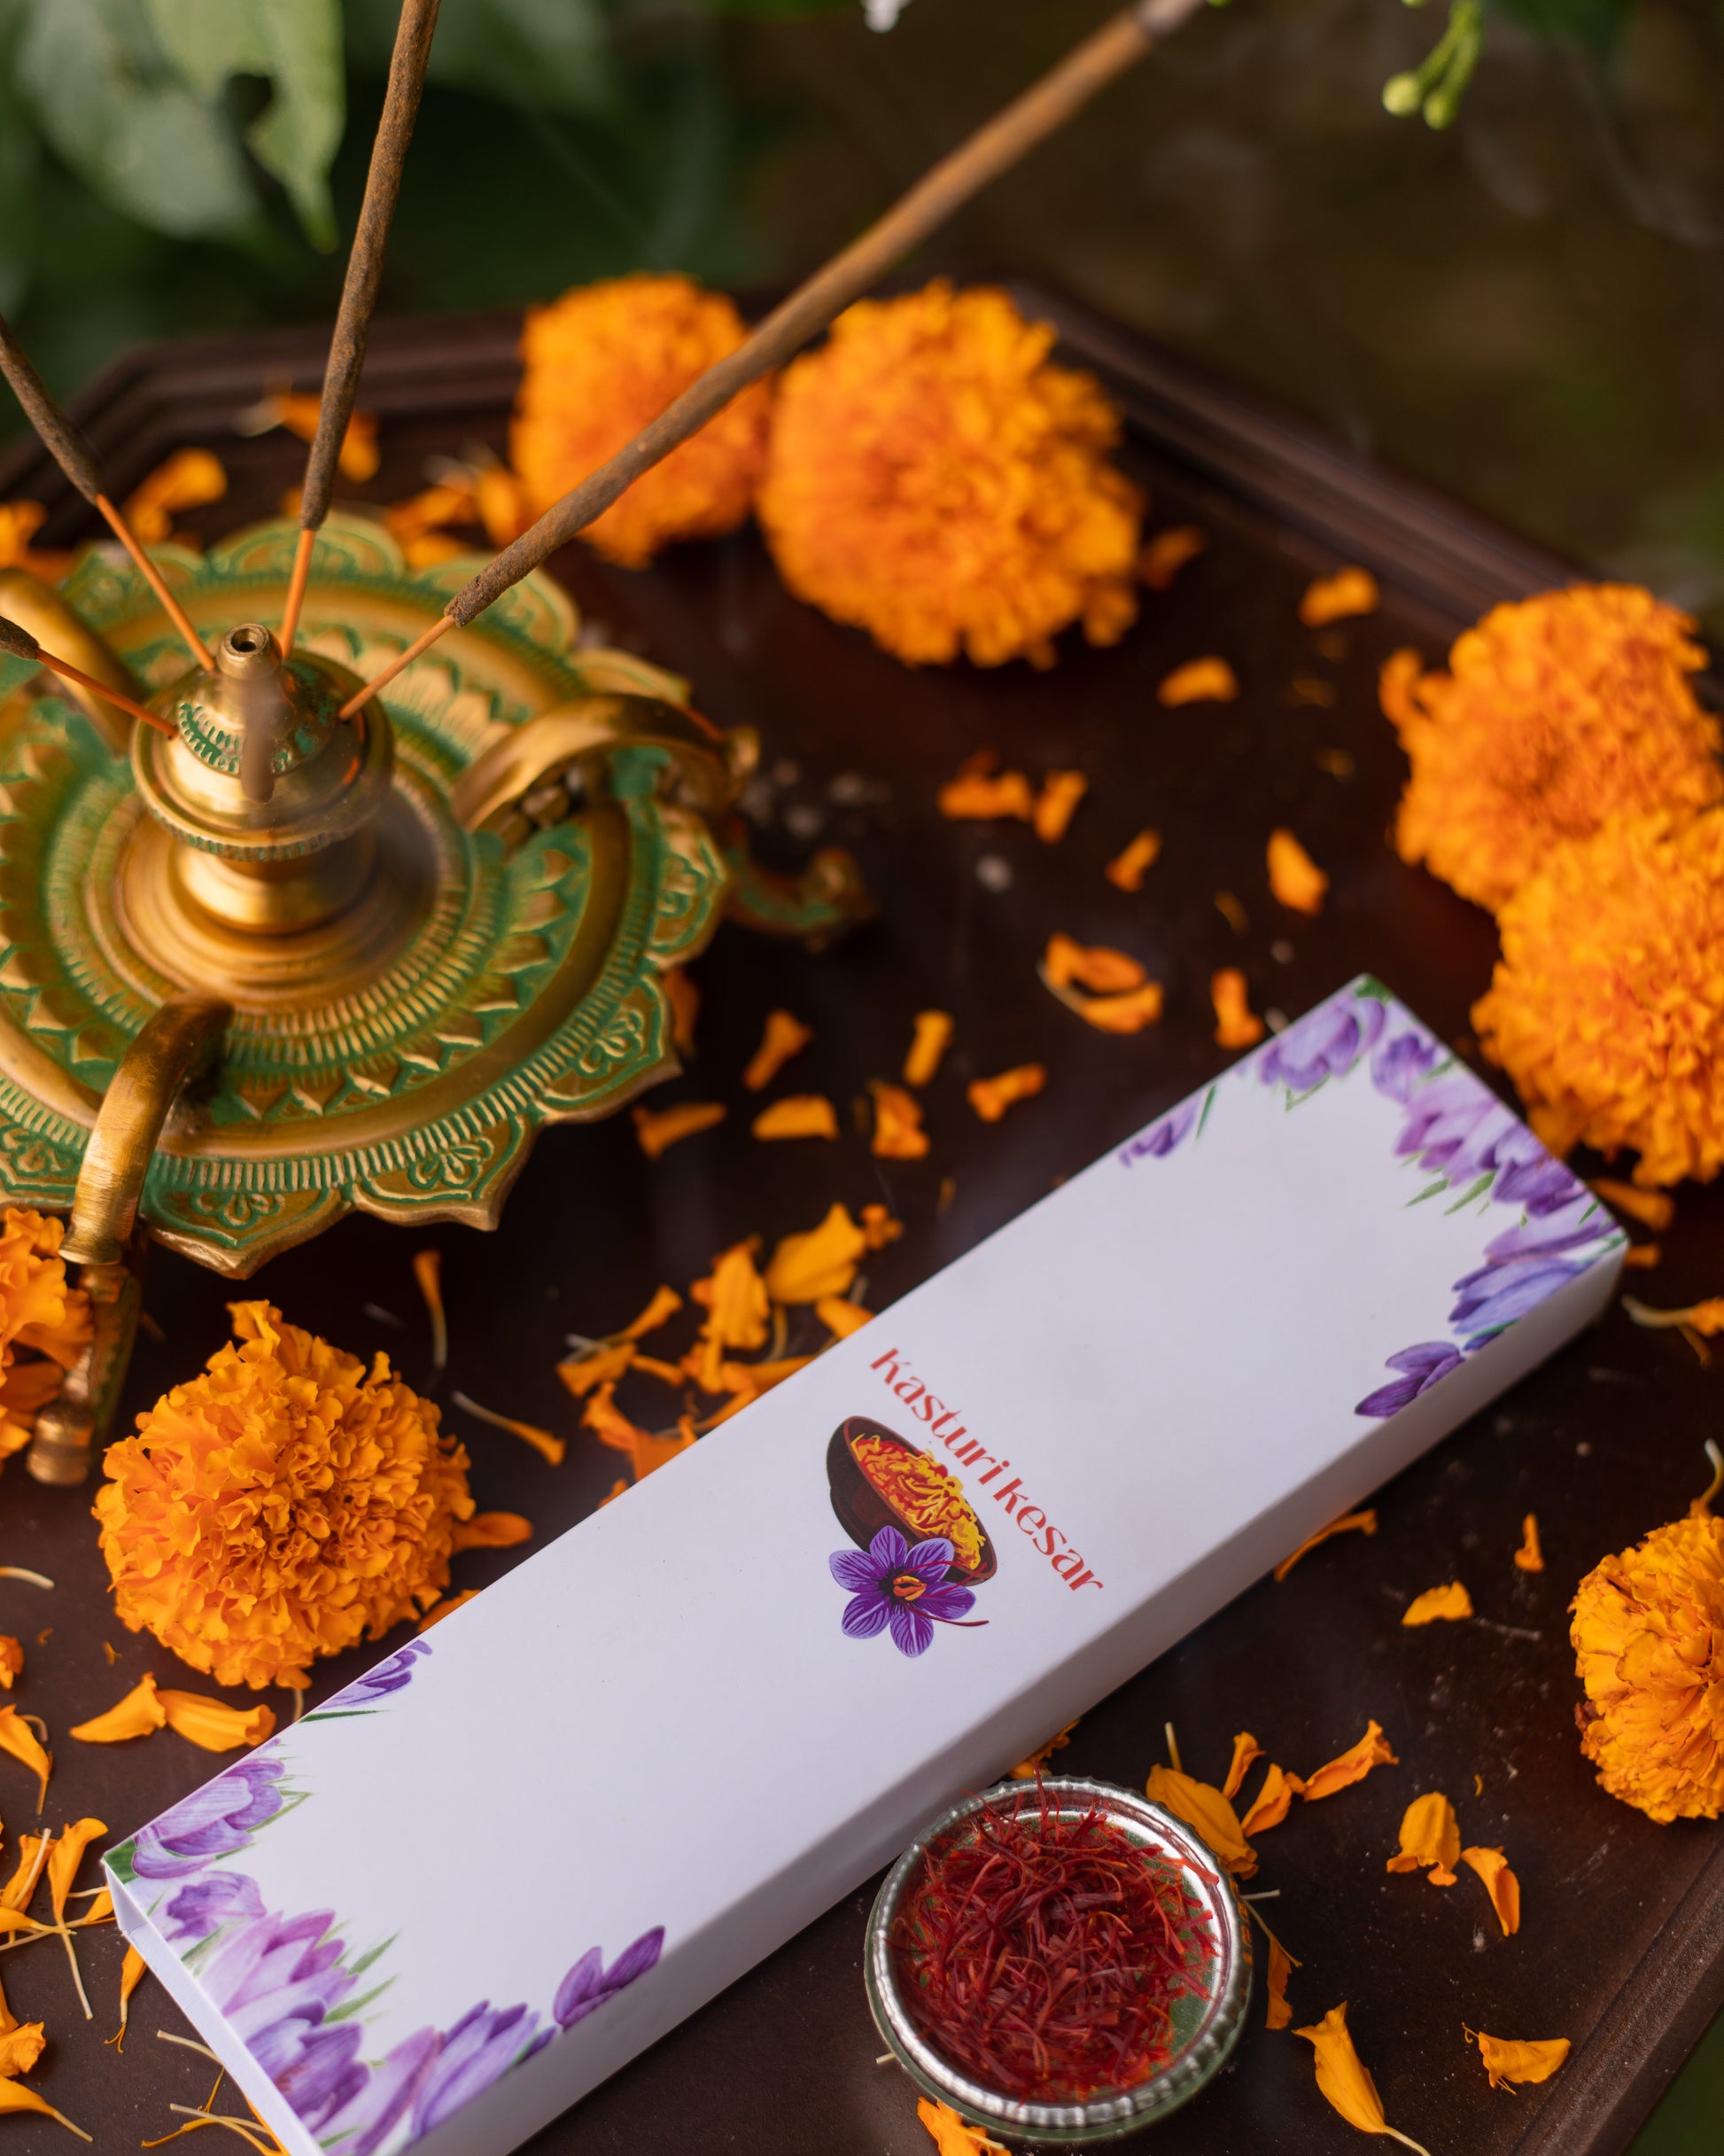 One of the most essentials ingredients in any pooja, Agarbatti / incense sticks are available in lavender, gulab, kesar kasturi, chandan, mogra